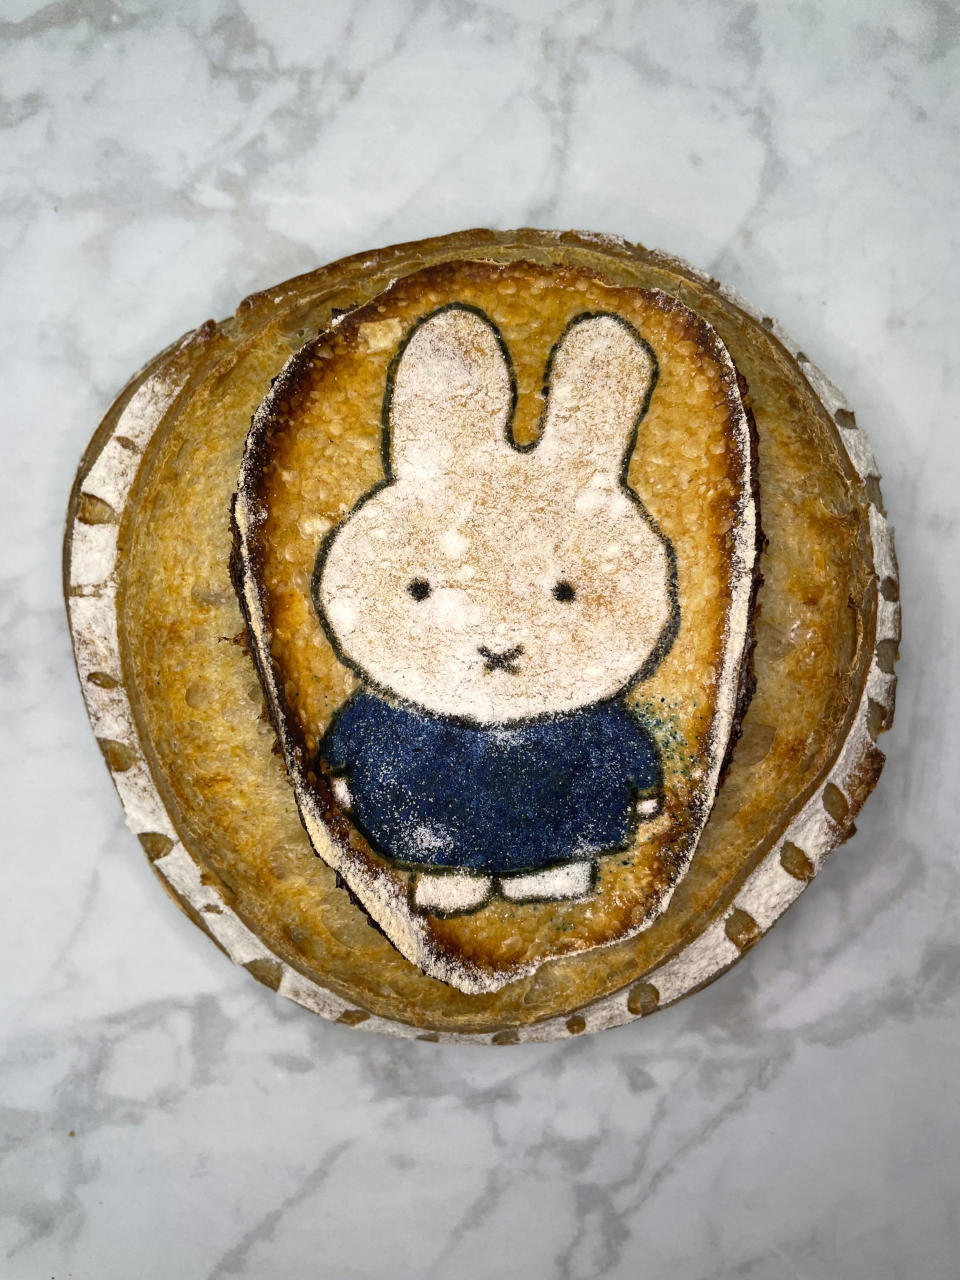 This undated photo provided by Kelson Herman shows a sourdough boule with an illustration of Miffy, a rabbit from a popular Dutch picture book series, made by Herman in his San Francisco home for Lunar New Year. (Kelson Herman via AP)